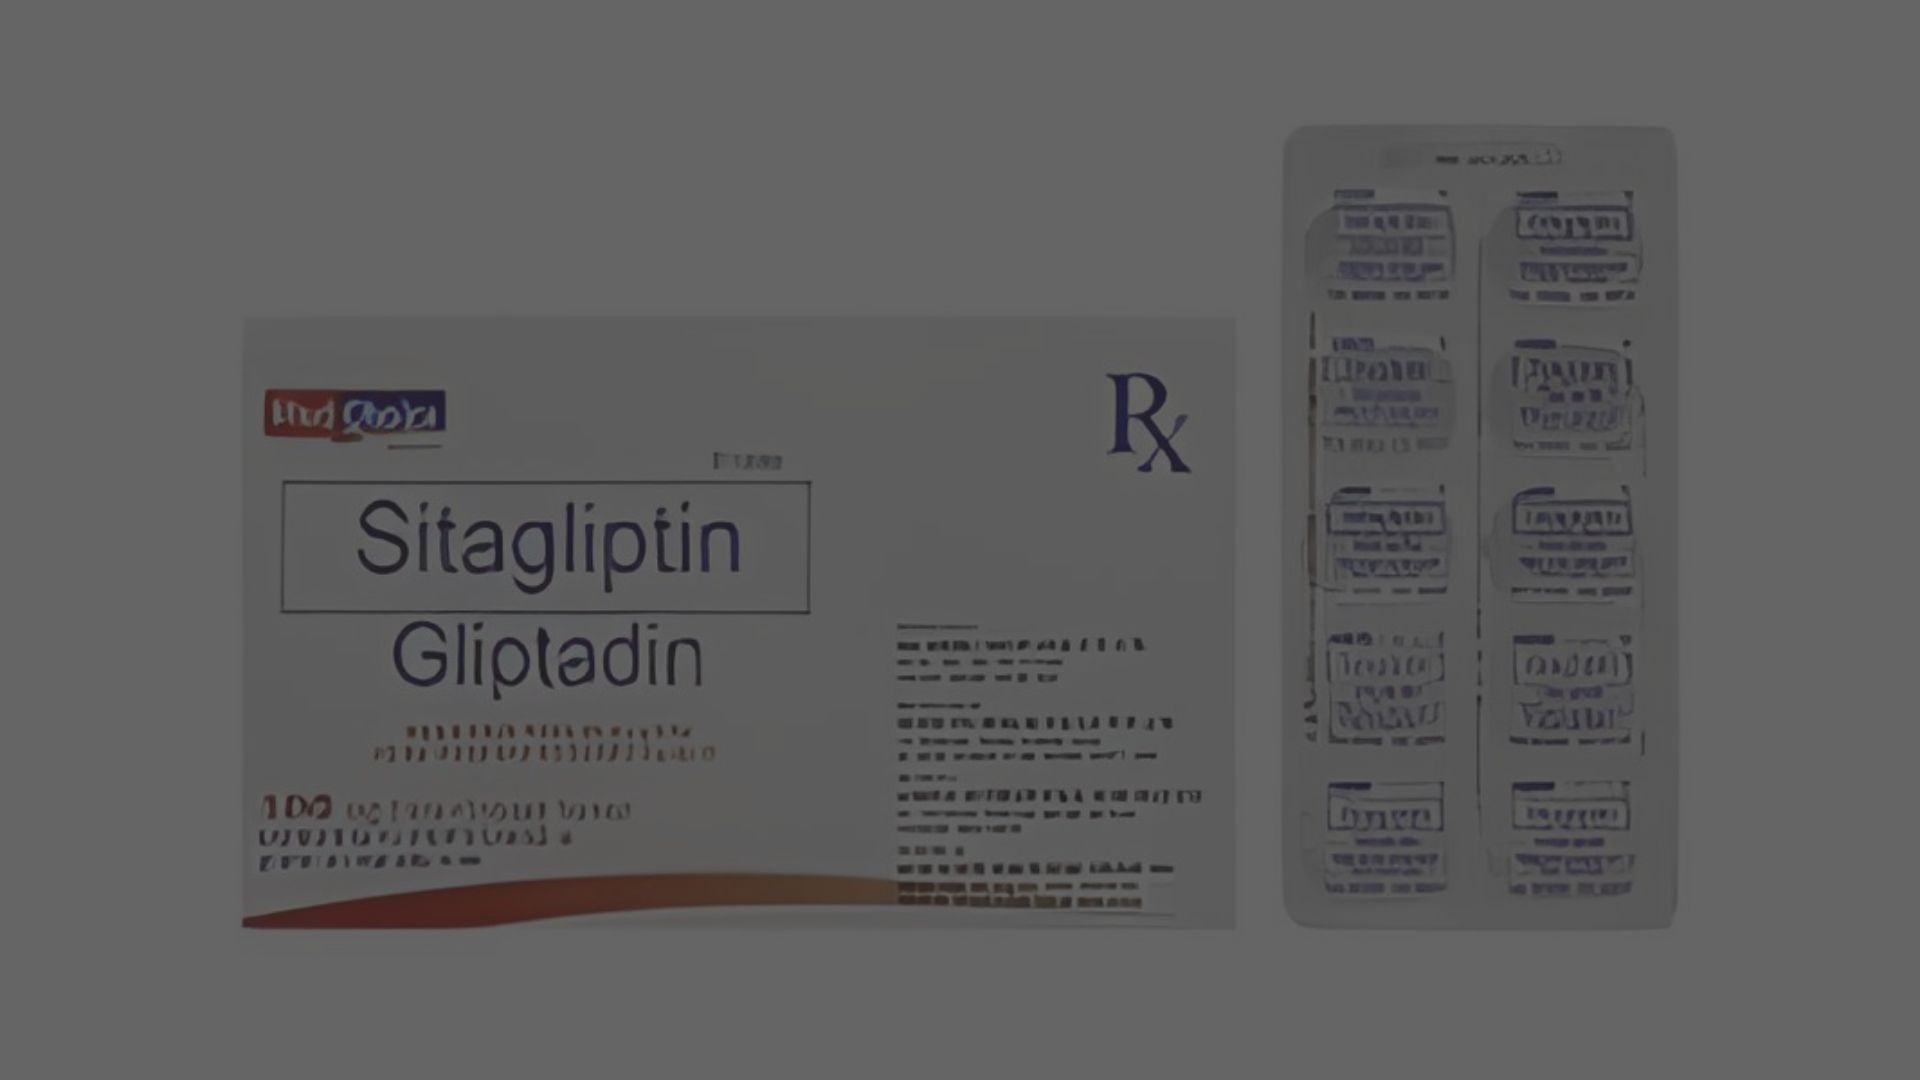 Sitagliptin for Type 2 Diabetes: How It Works and Side Effects